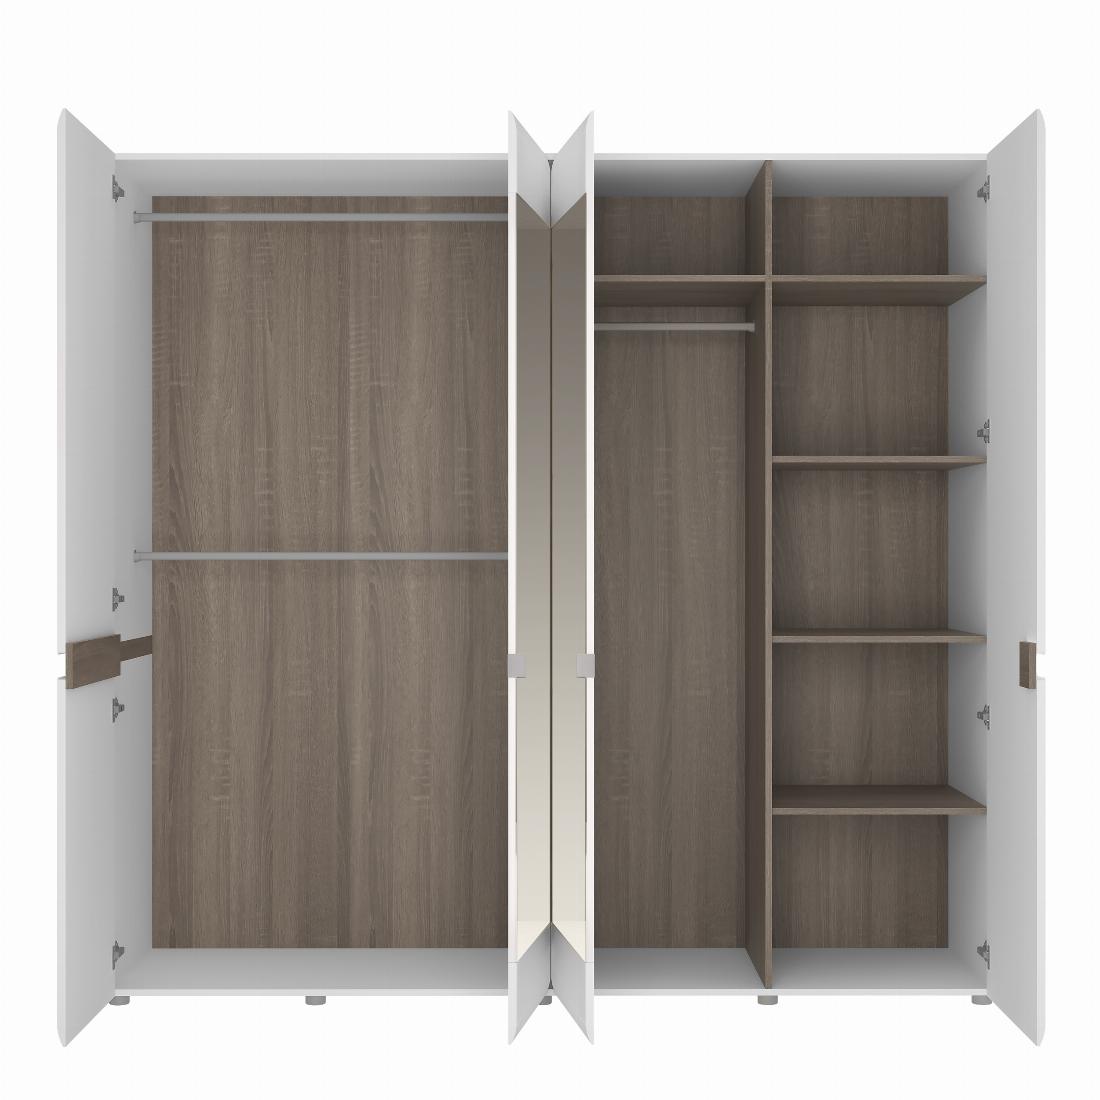 Chelsea Chelsea 4 Door Wardrobe with mirrors and Internal shelving